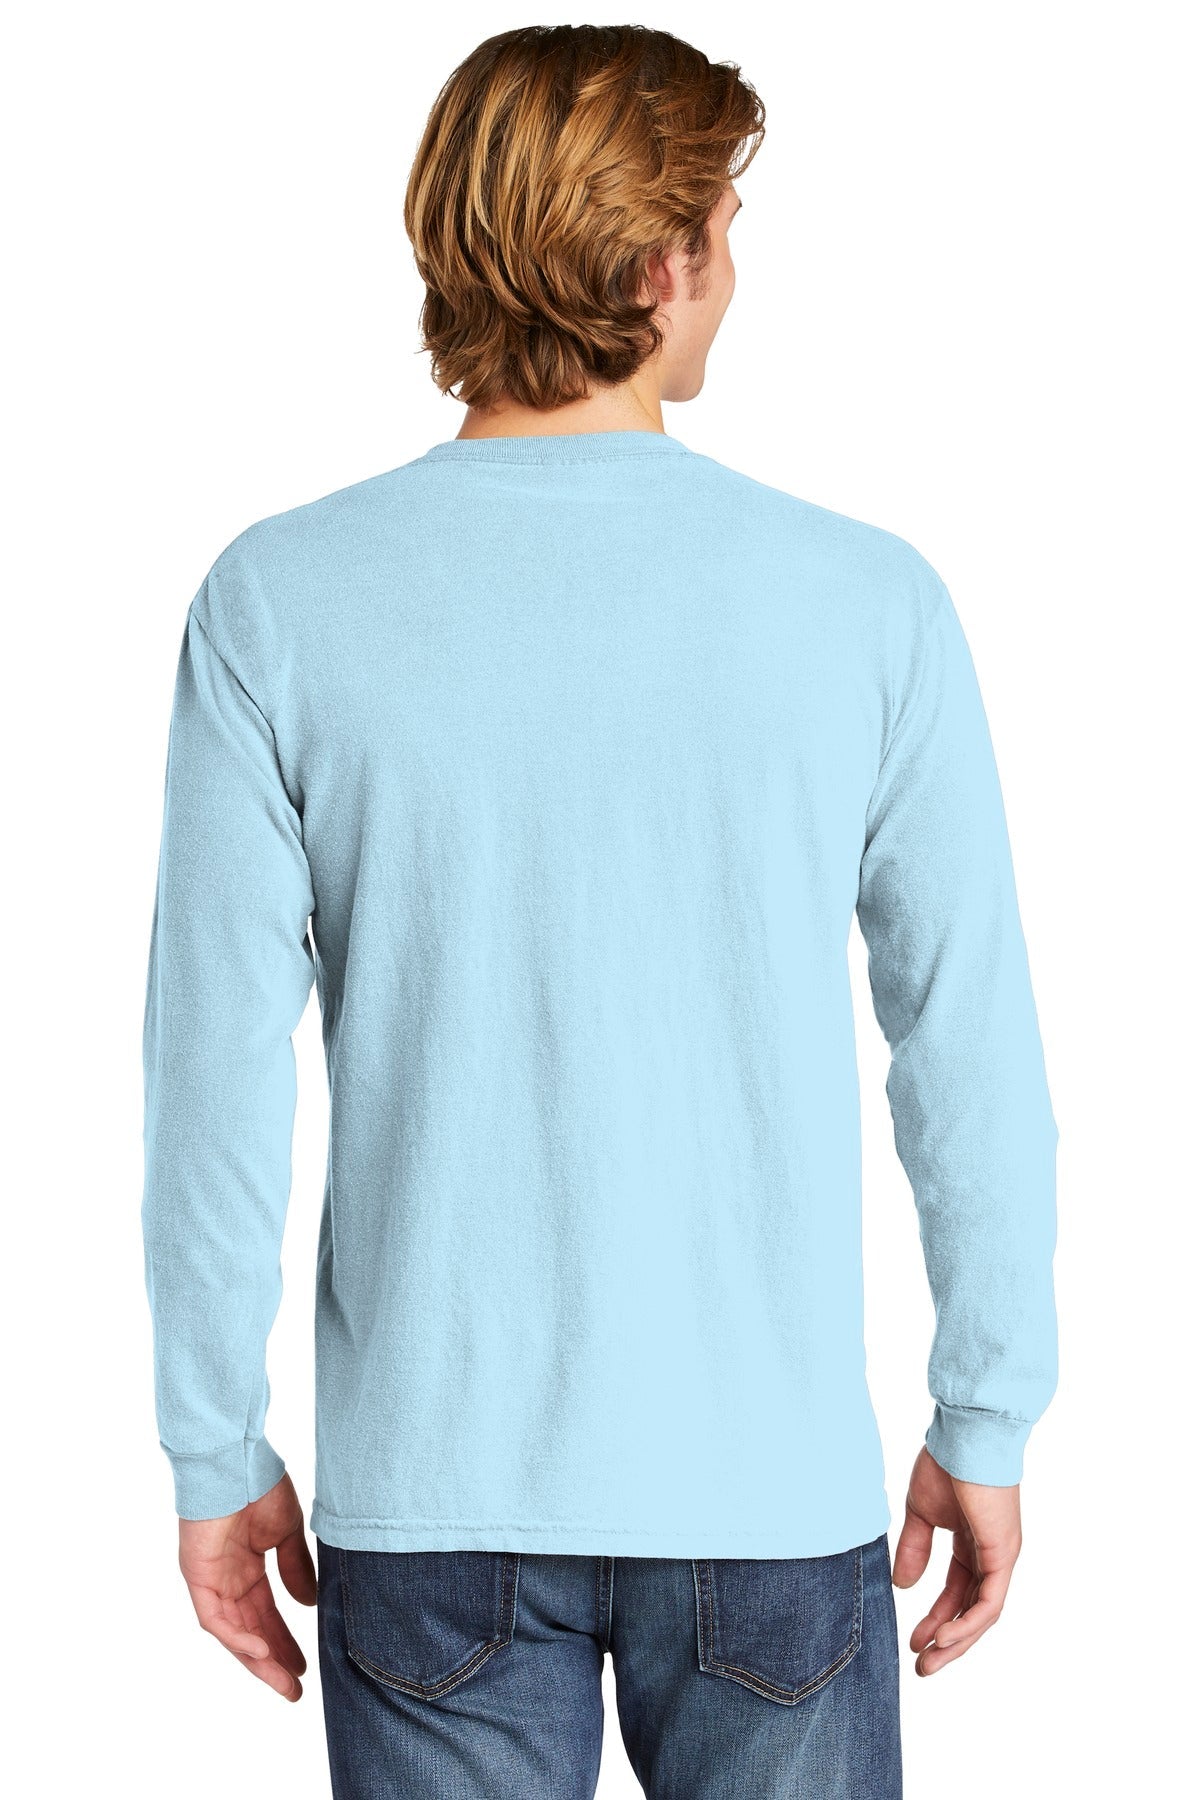 COMFORT COLORS ® Heavyweight Ring Spun Long Sleeve Pocket Tee. 4410 [Chambray] - DFW Impression